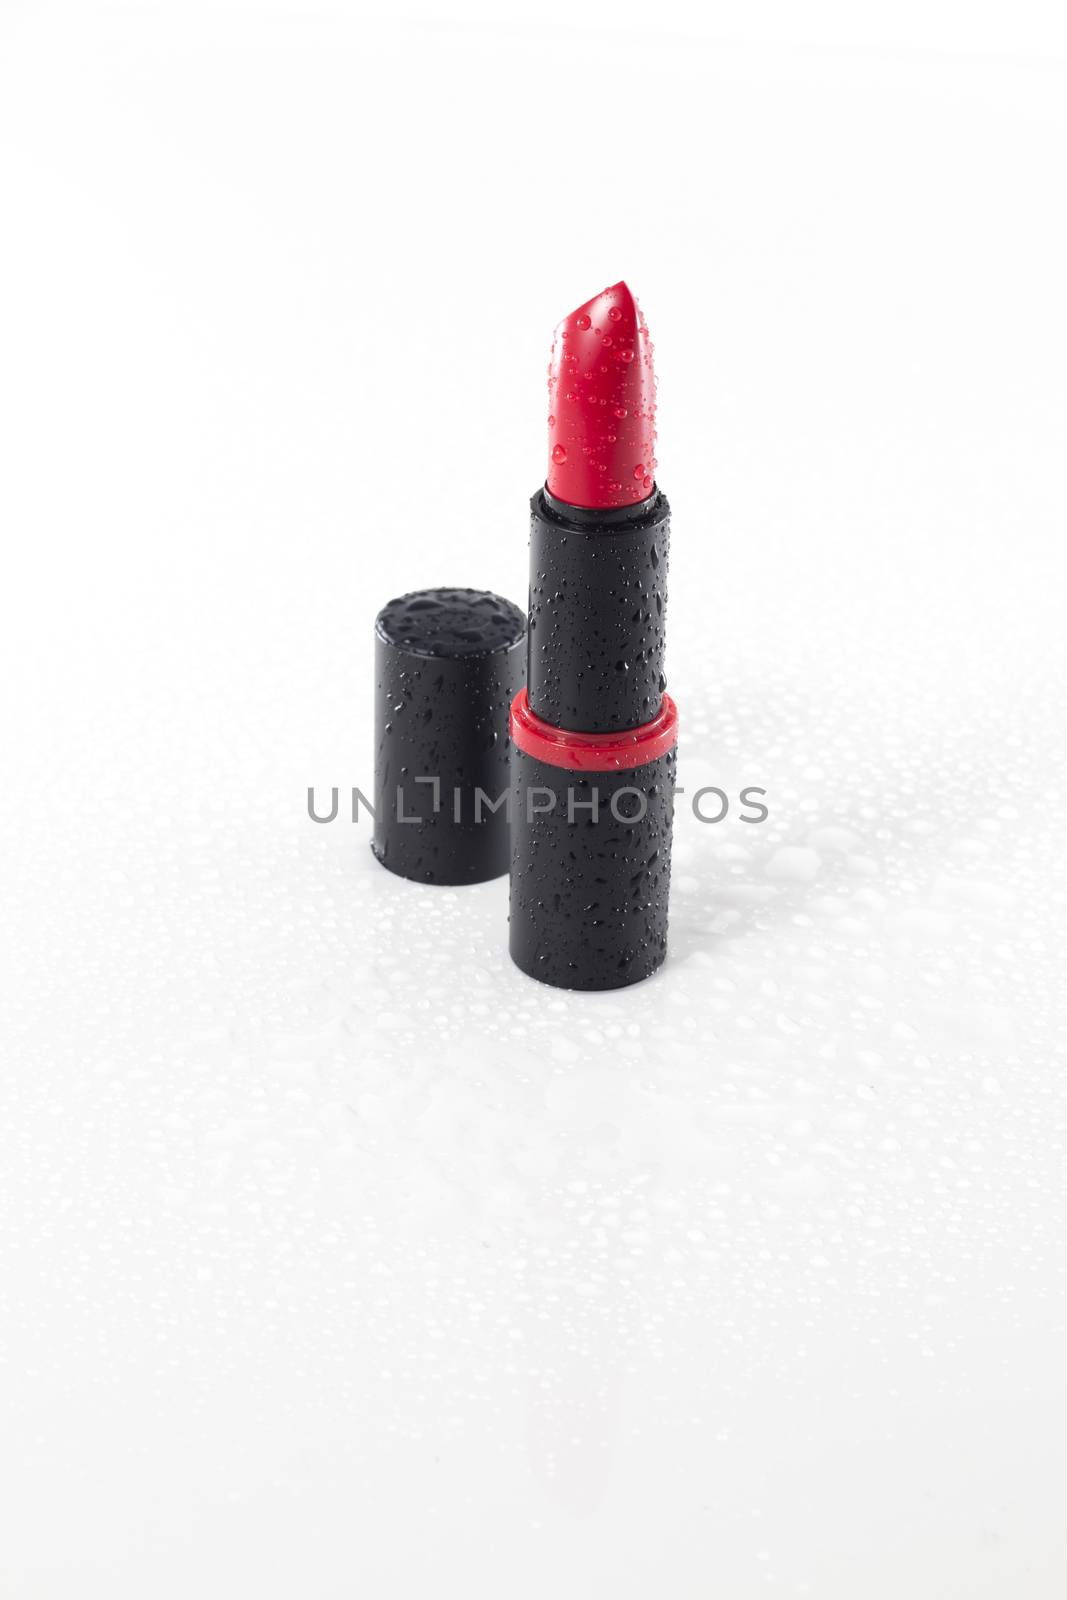 red lipstick with water drops isolated on white background by avanheertum